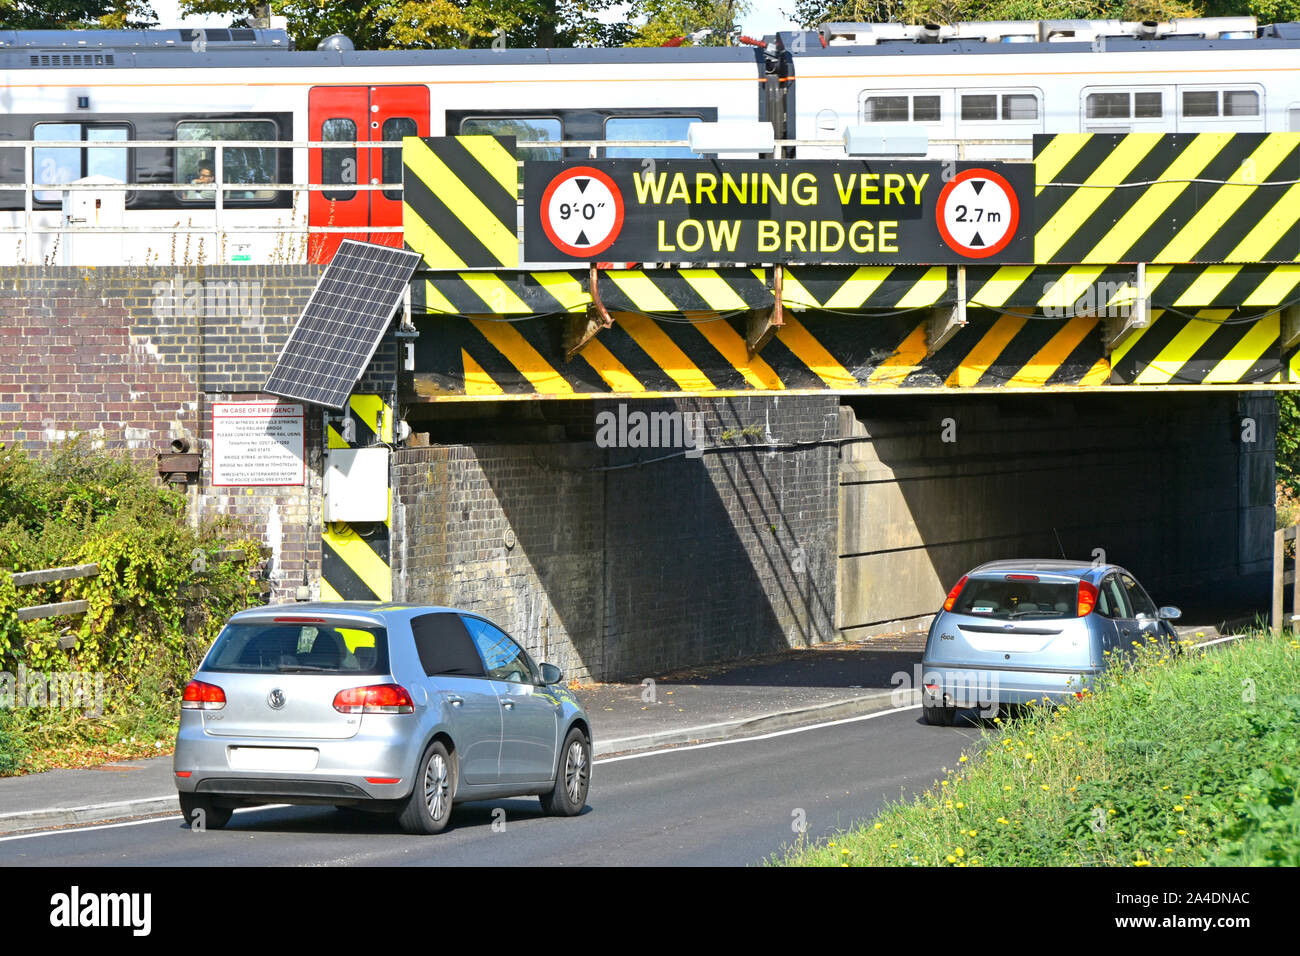 Close up of metric warning sign & black yellow hazard stripes painted on side of very low train railway bridge above cars driving into Ely England UK Stock Photo